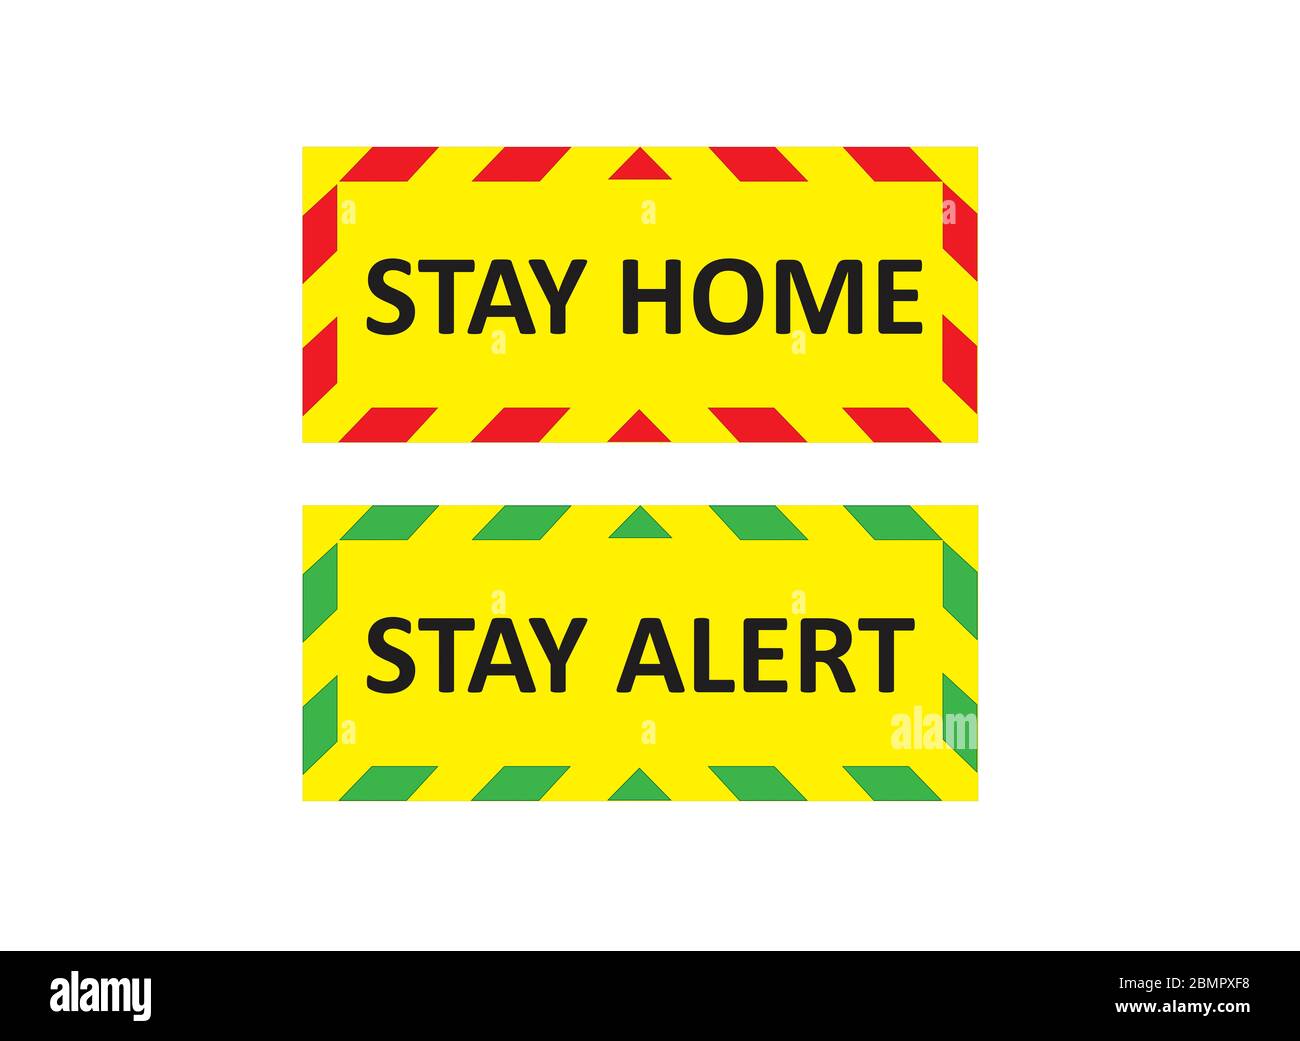 STAY HOME and STAY ALERT warning signs. Red and green quarantine signs that help to battle against Covid-19 in the United Kingdom. RASTER. Stock Photo